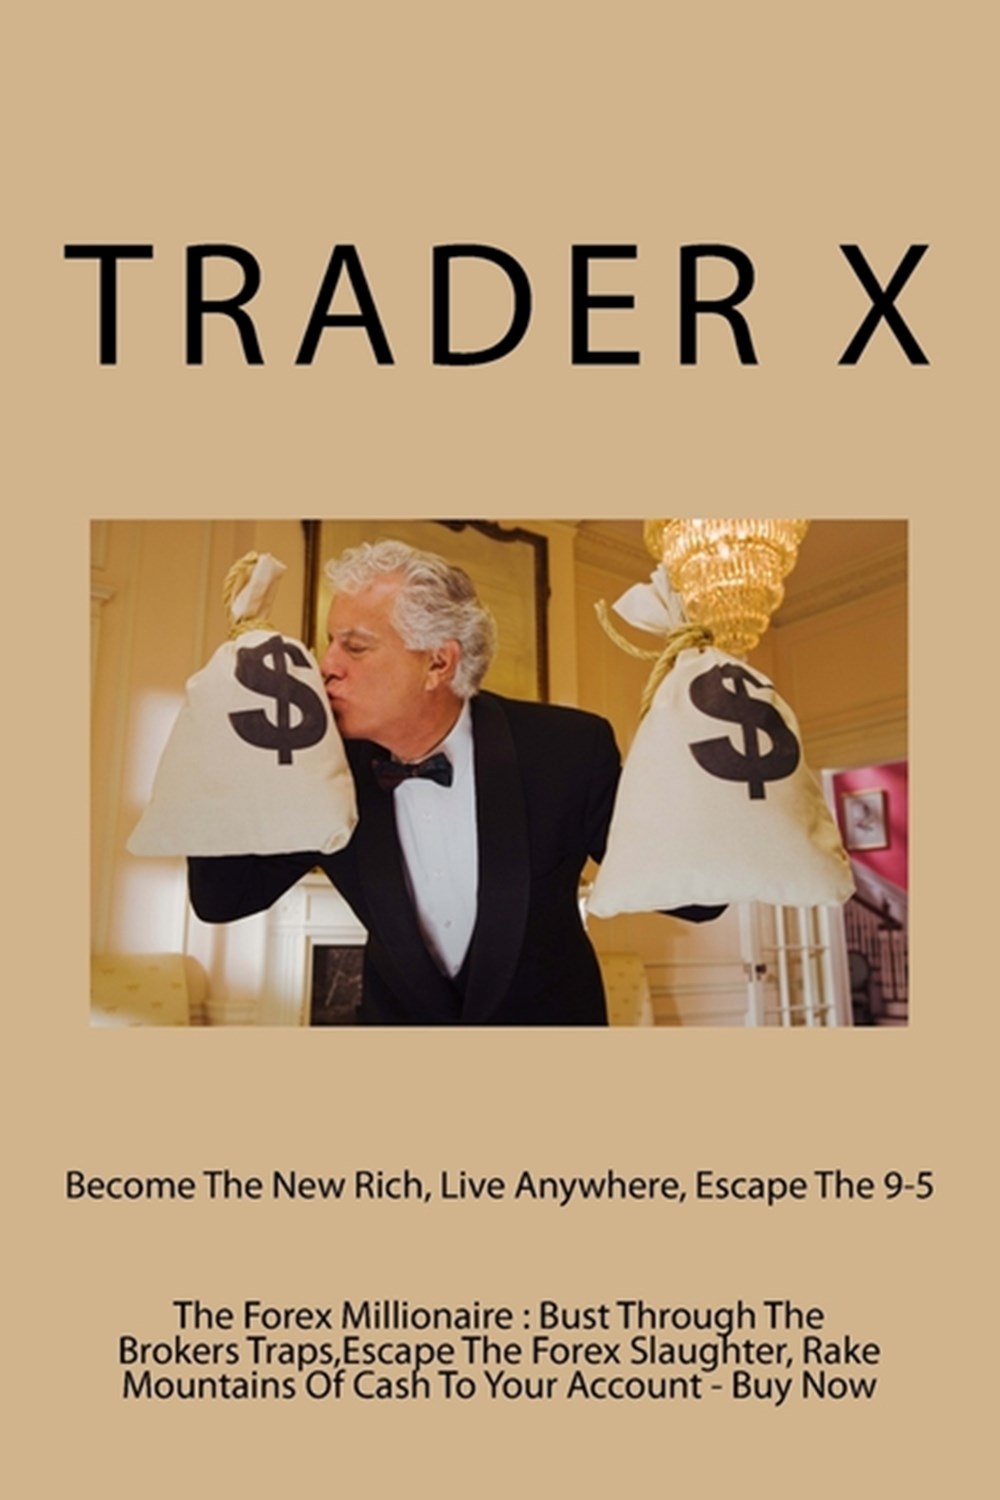 Forex Millionaire: Bust Through The Brokers Traps, Escape The Forex Slaughter, Rake Mountains Of Cas